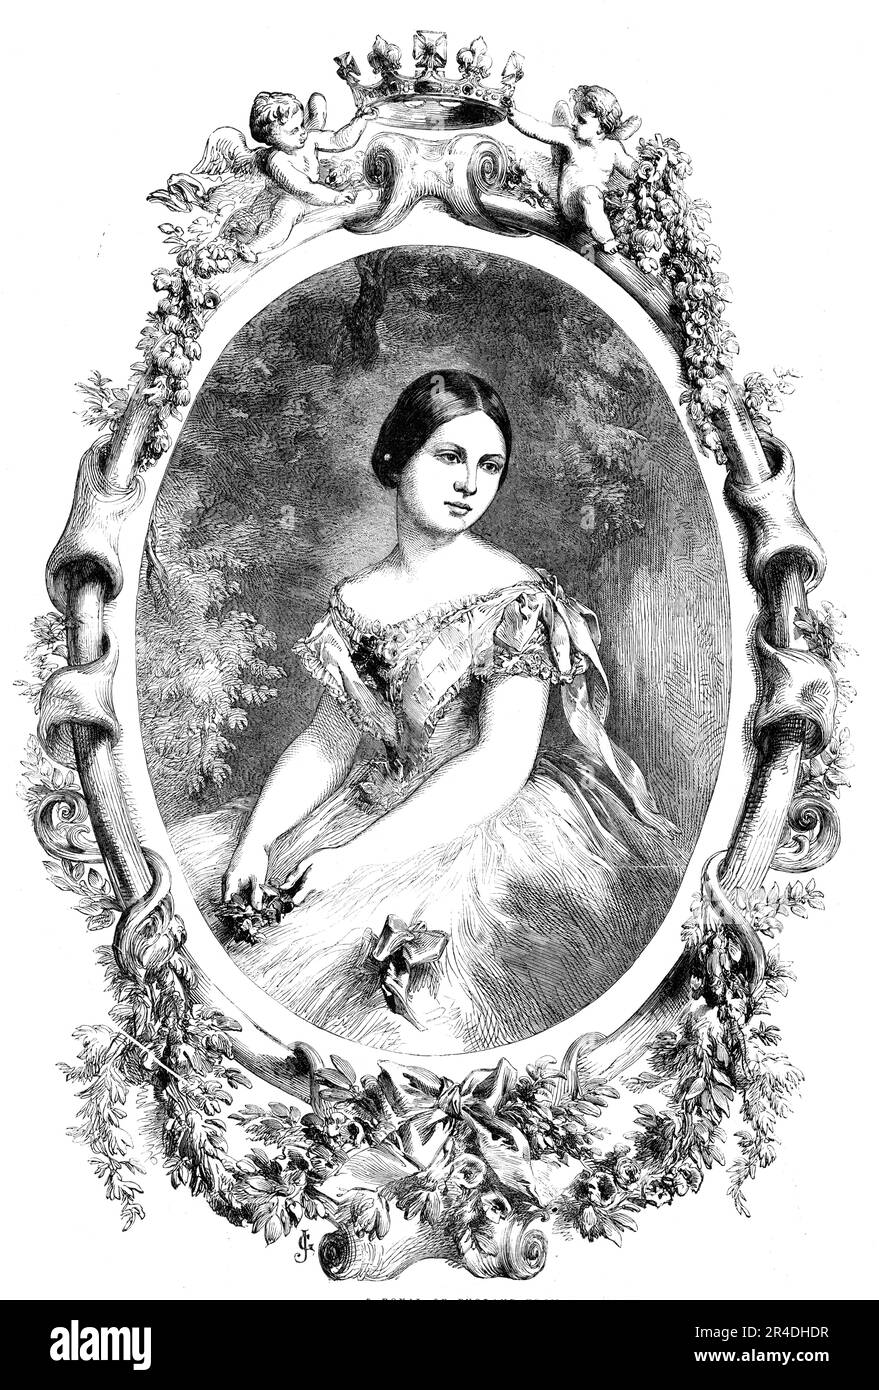 Her Royal Highness the Princess Royal of England - from a photograph by Mayall, 1856. Portrait of Victoria, Princess Royal, daughter of Queen Victoria. She married Frederic William, Prince of Prussia. From &quot;Illustrated London News&quot;, 1856. Stock Photo